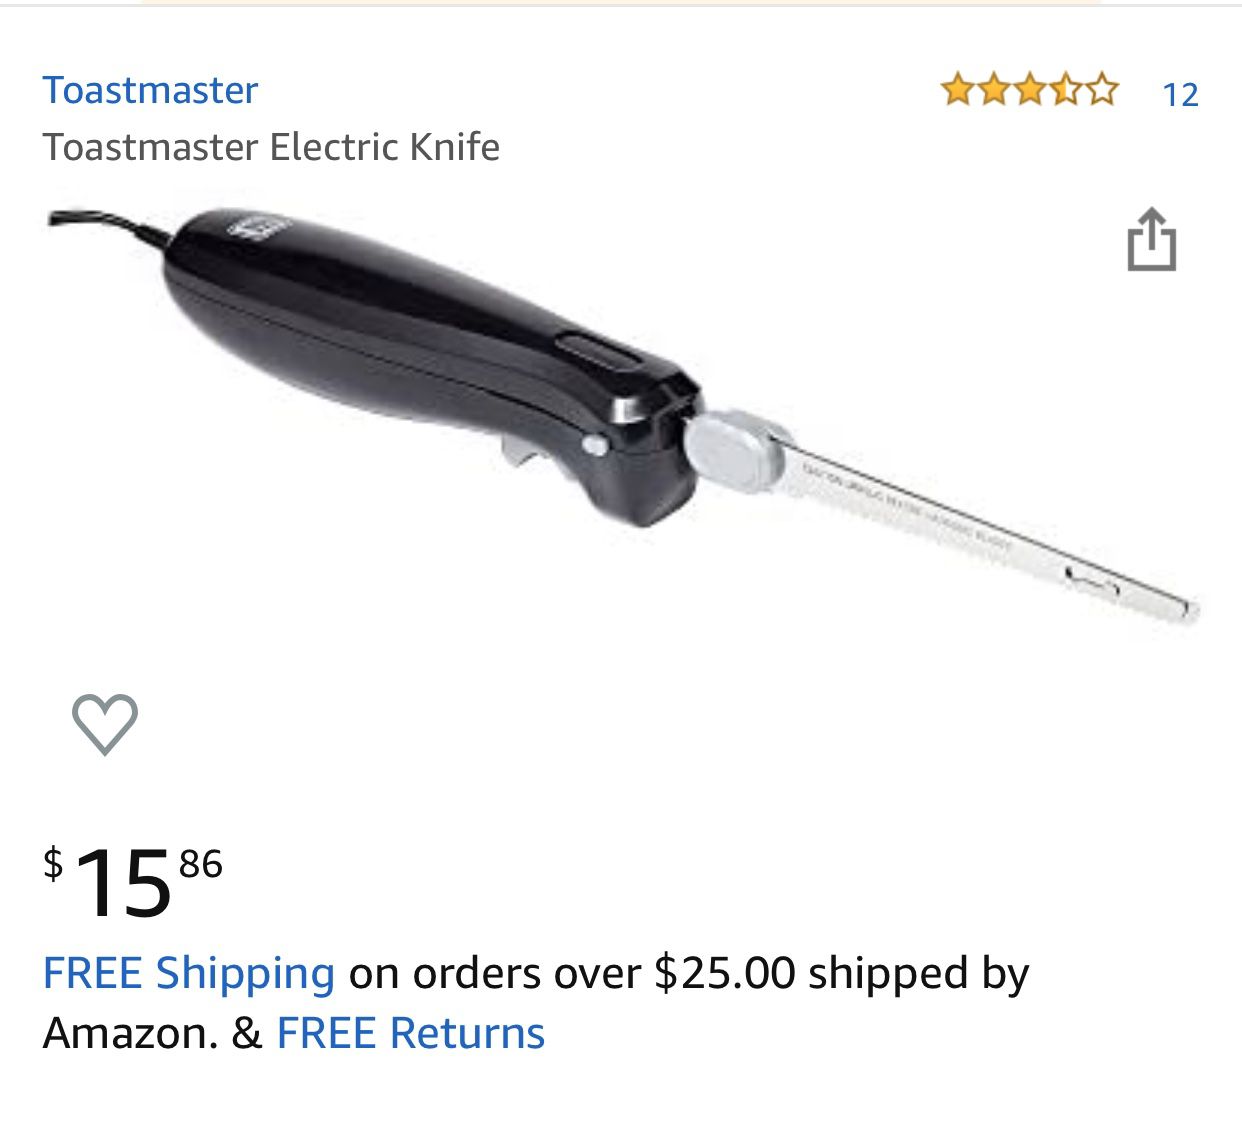 Toastmaster electric knife